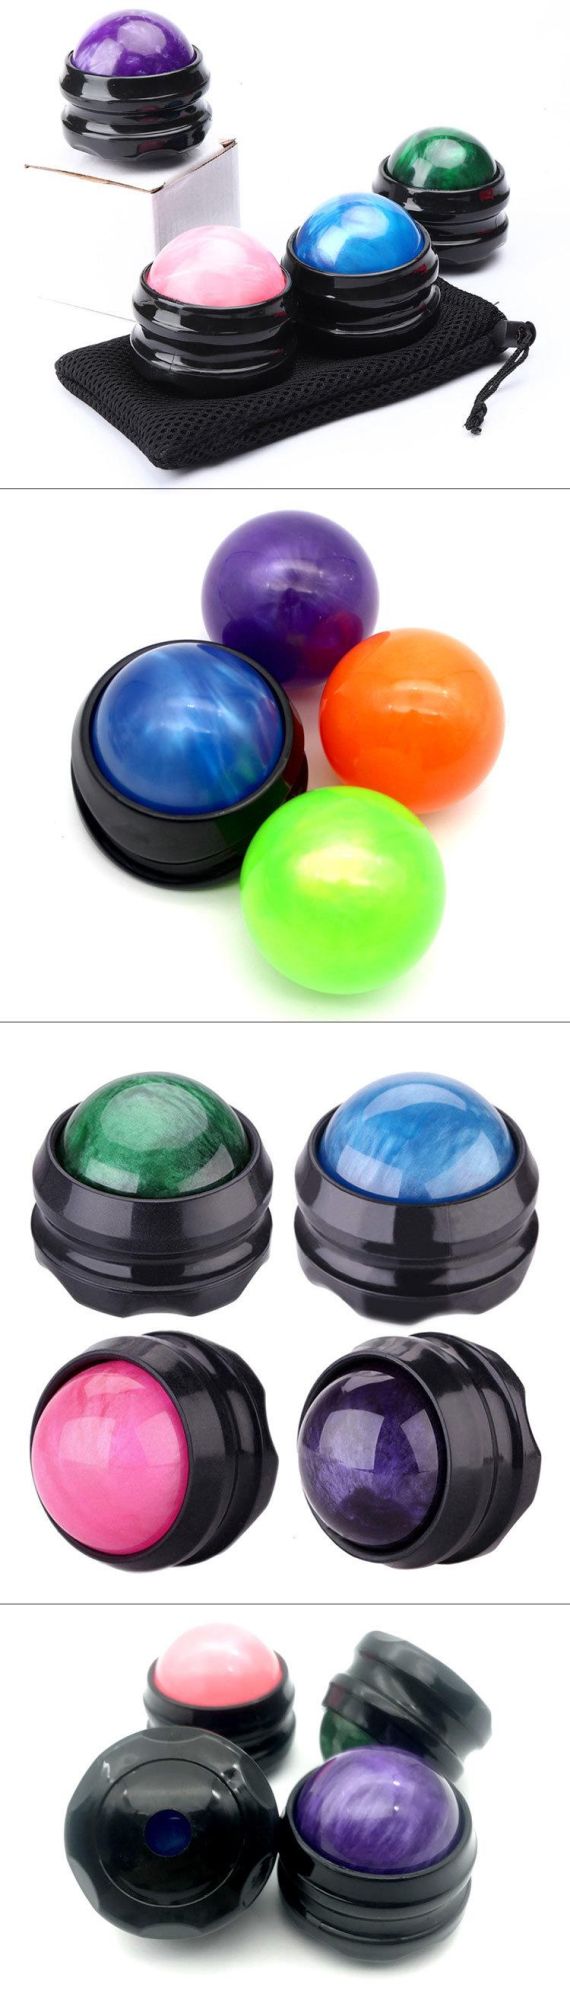 Wholesale Pain Relief resin ABS Rolling Ball Massage Roller Ball